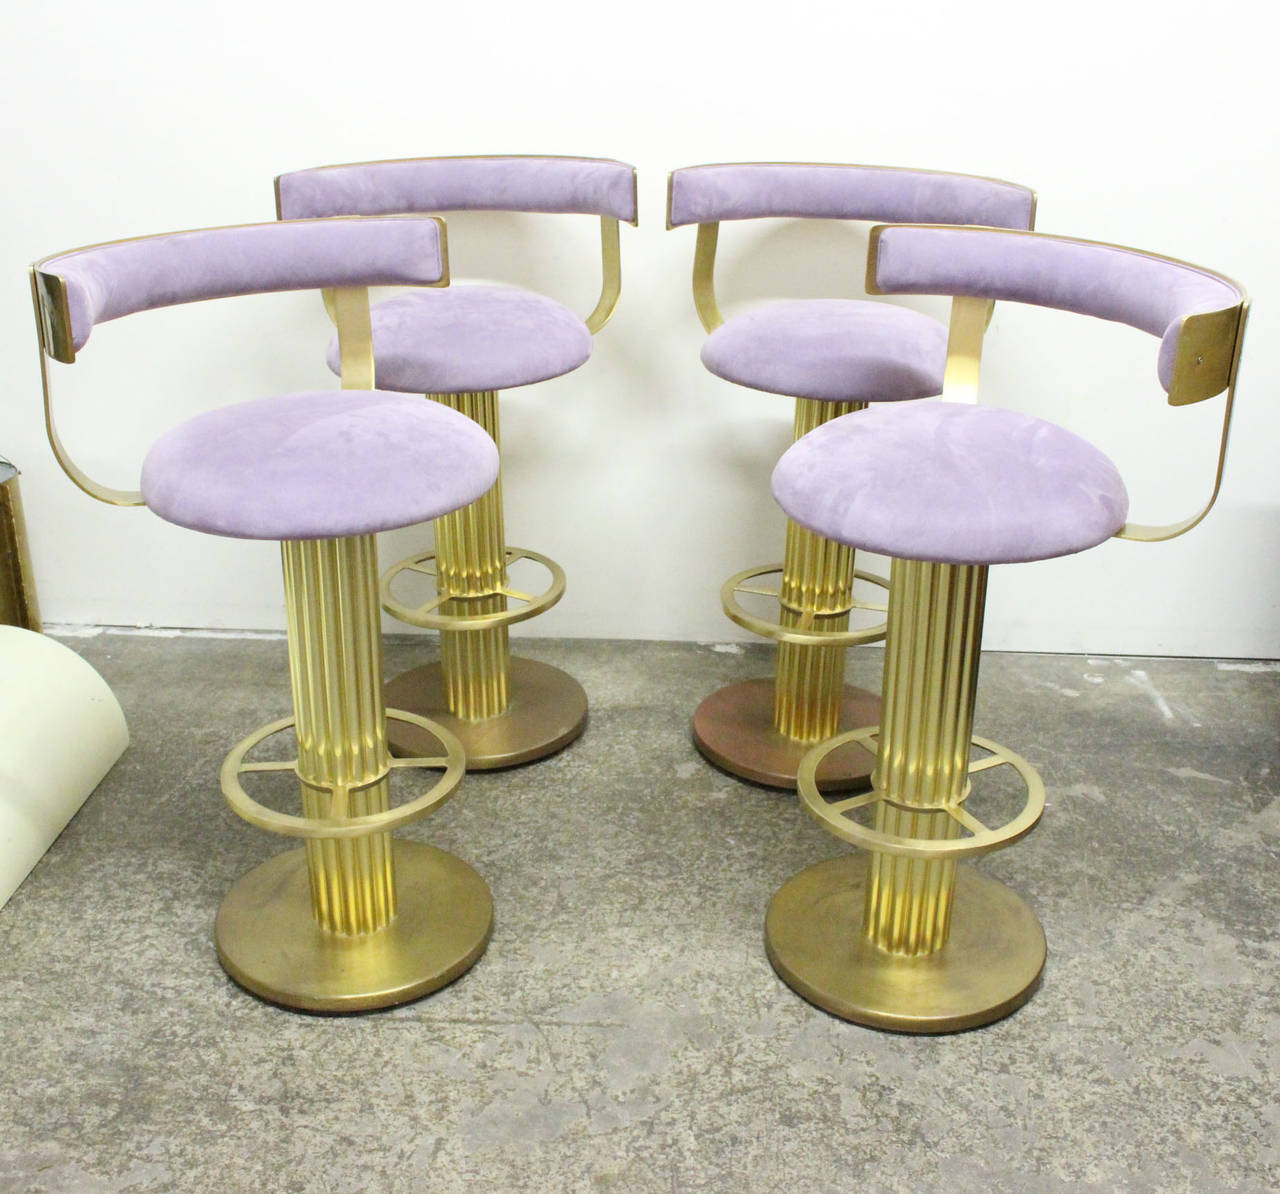 Hollywood Regency Set of Four Brass Bar Stools by Design for Leisure